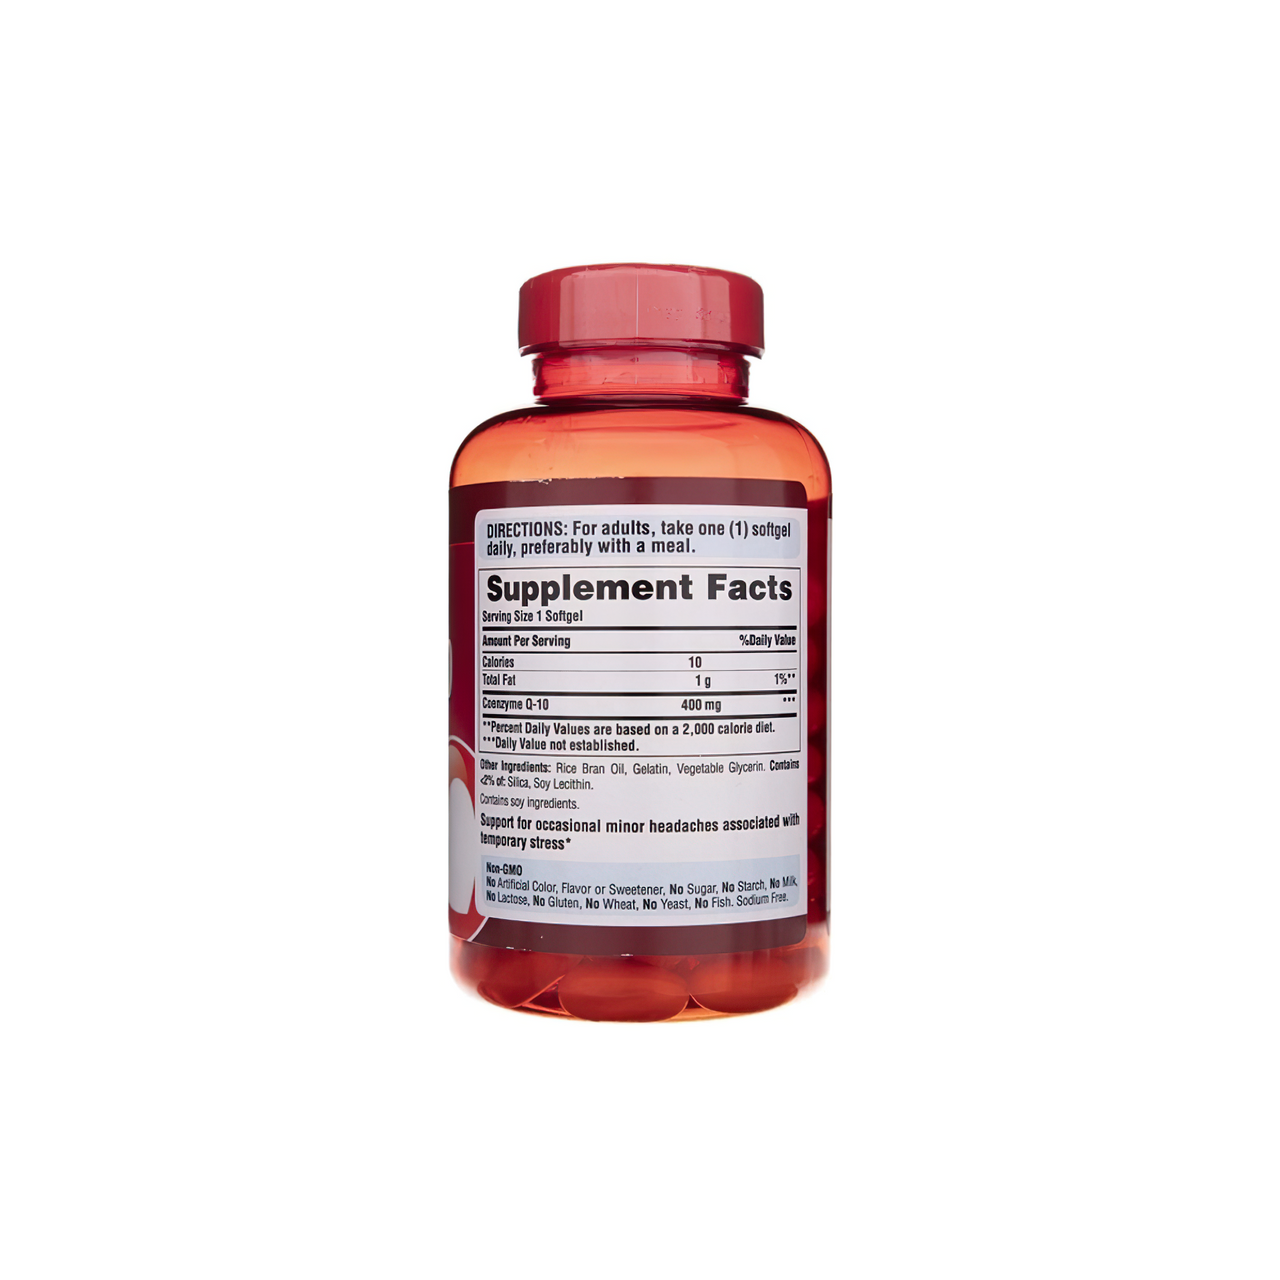 A bottle of Coenzyme Q10 Rapid Release 400 mg 120 Sgel by Puritan's Pride on a white background.